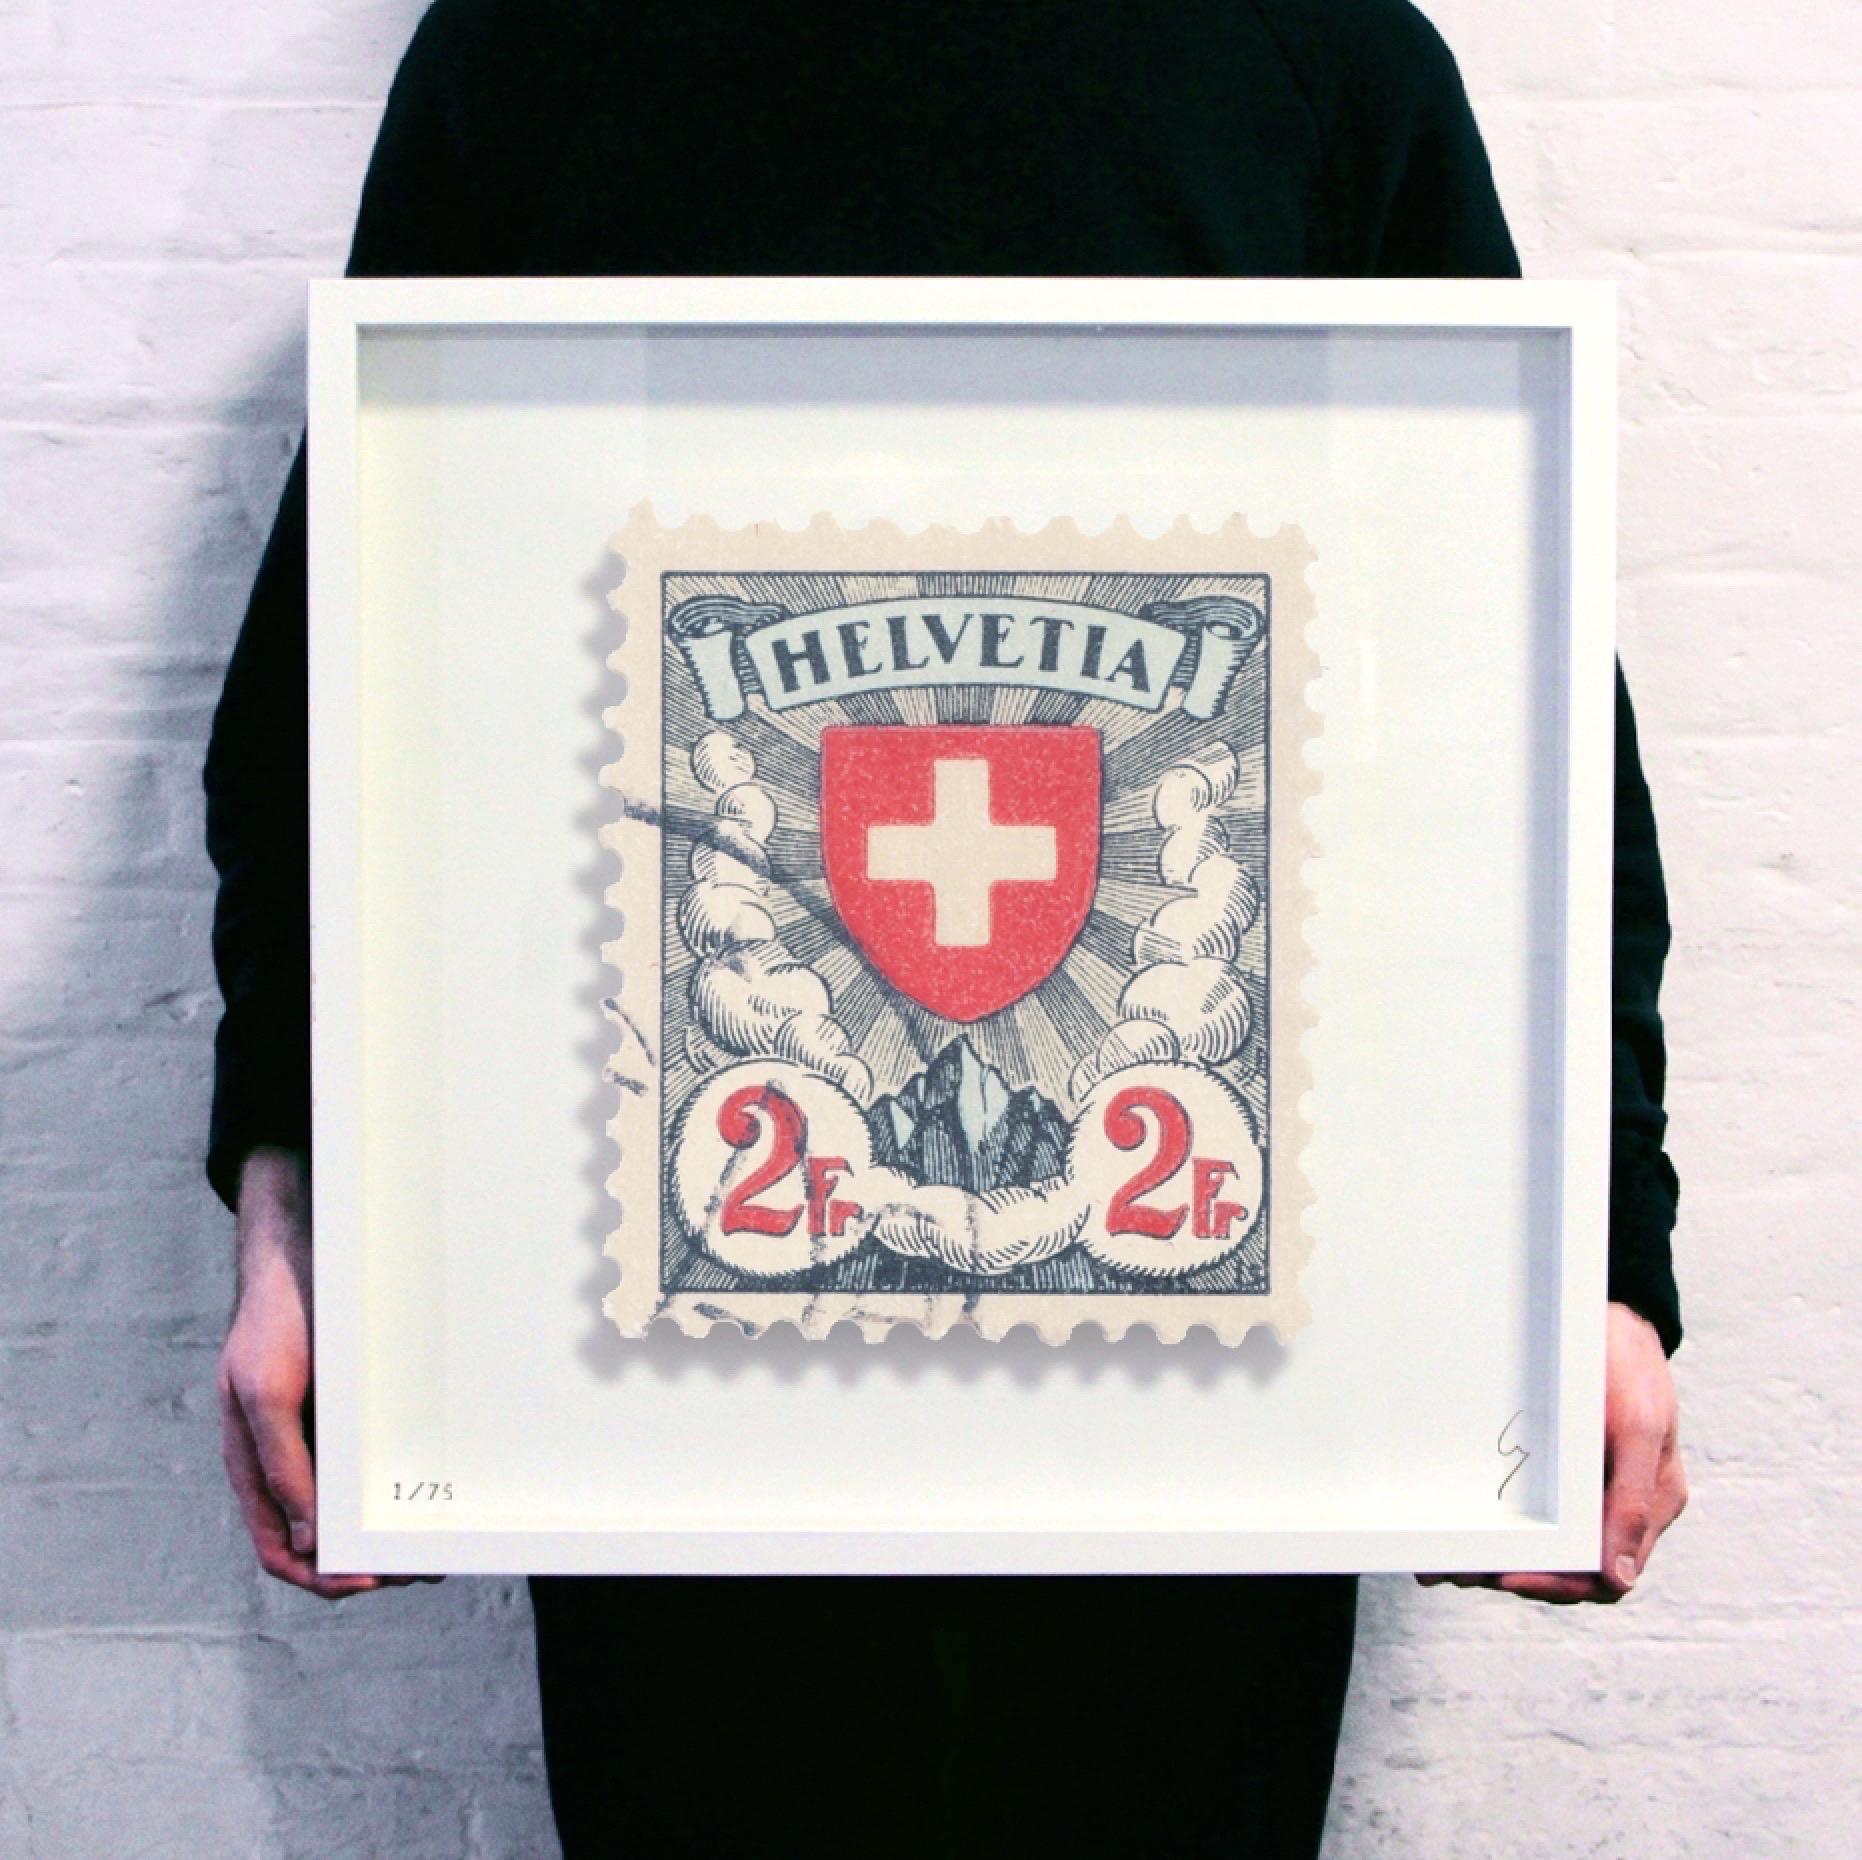 Guy Gee, Switzerland (medium)

Hand-engraved print on 350gsm on G.F Smith card
31 x 35 cm (12 1/5 x 13 4/5)
Frame included 
Edition of 75 

Each artwork by Guy had been digitally reimagined from an original postage stamp. Cut out and finished by